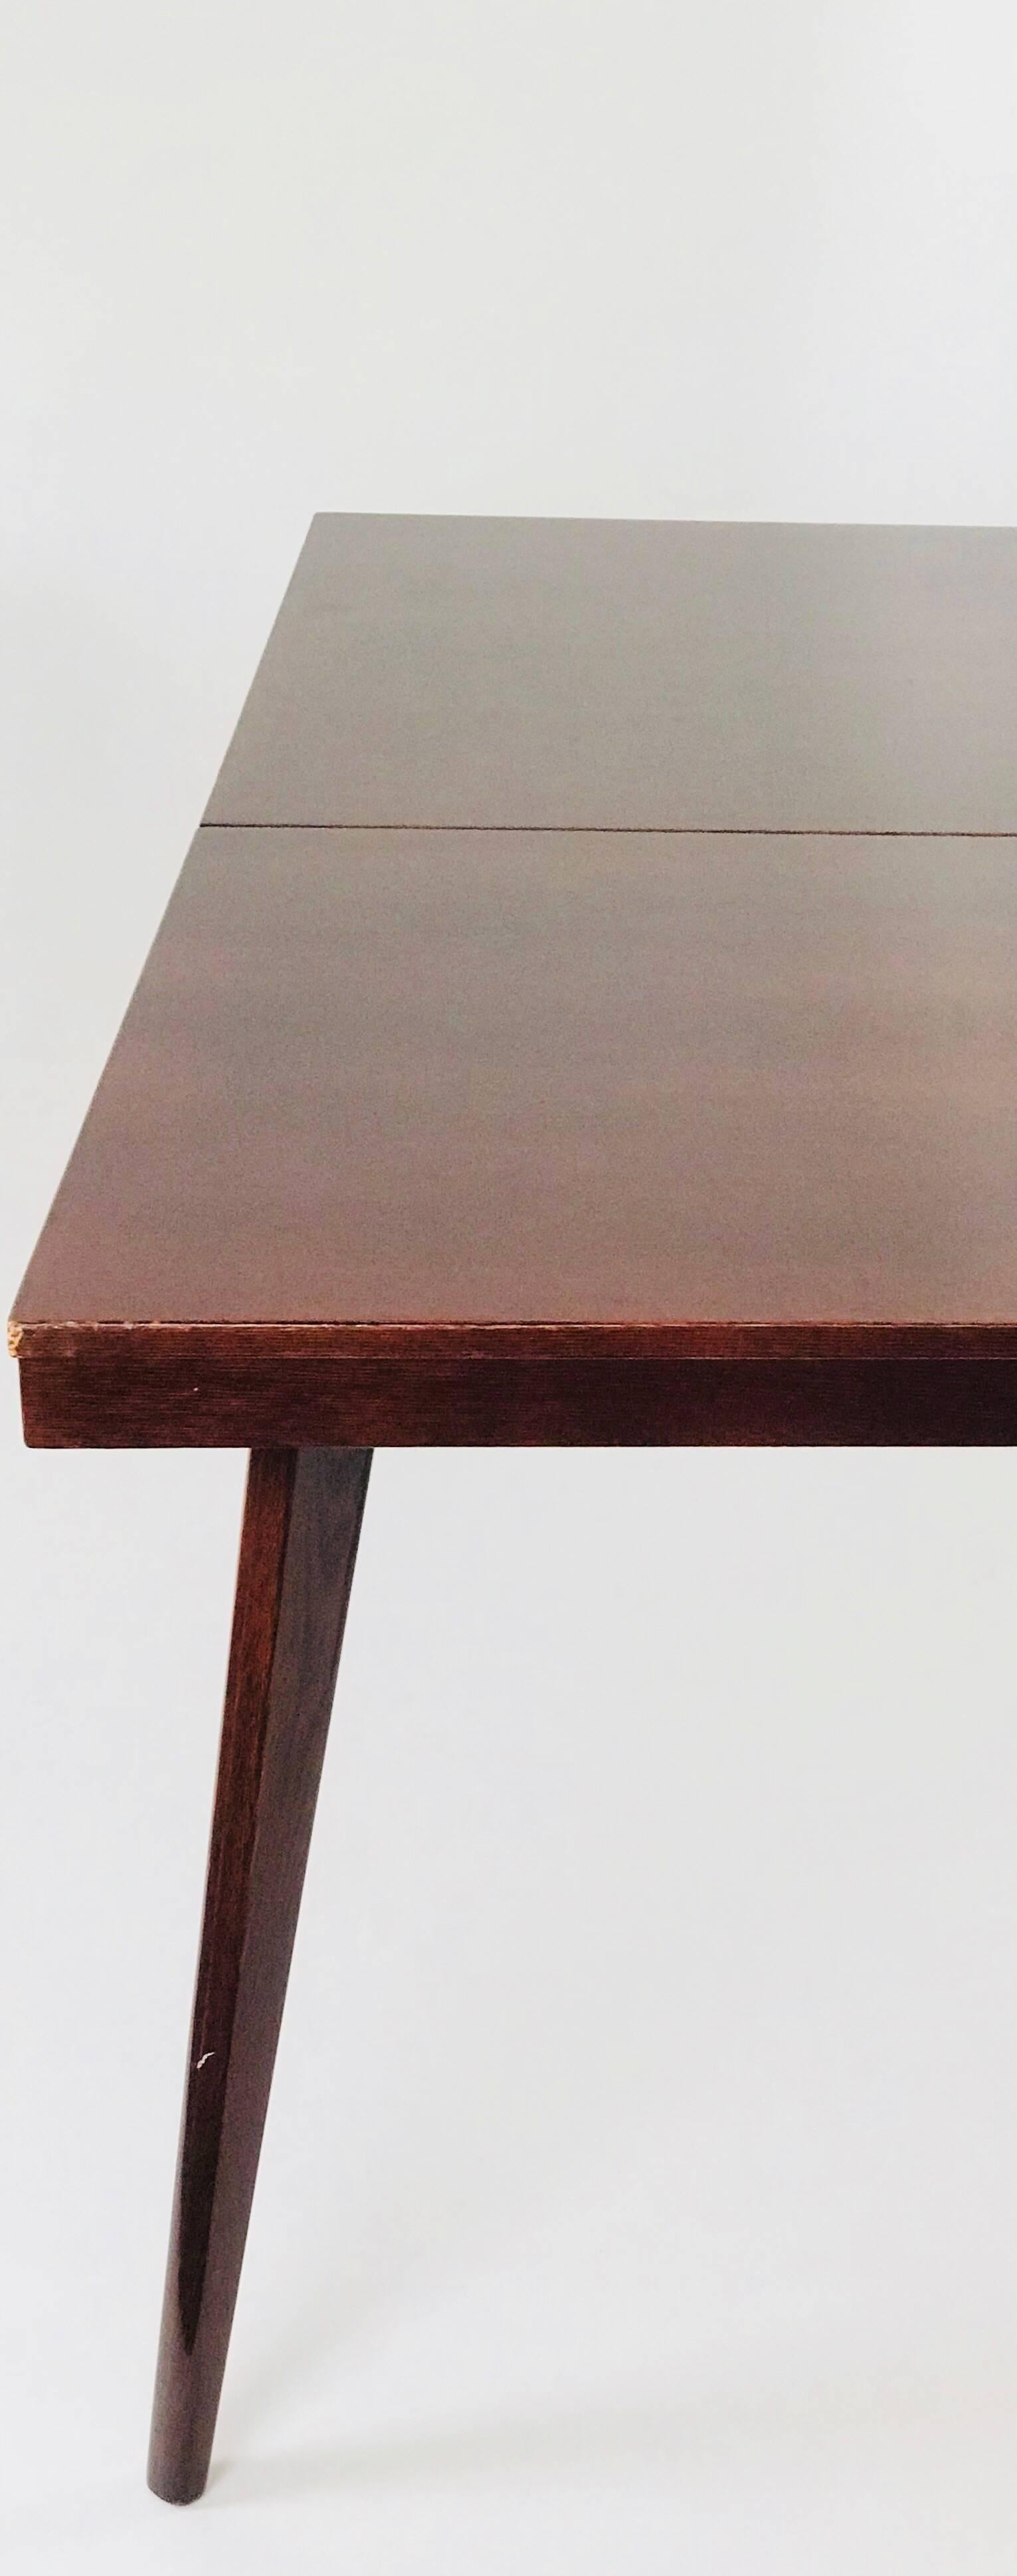 20th Century Midcentury Dining Table by Gilbert Rohde for Herman Miller